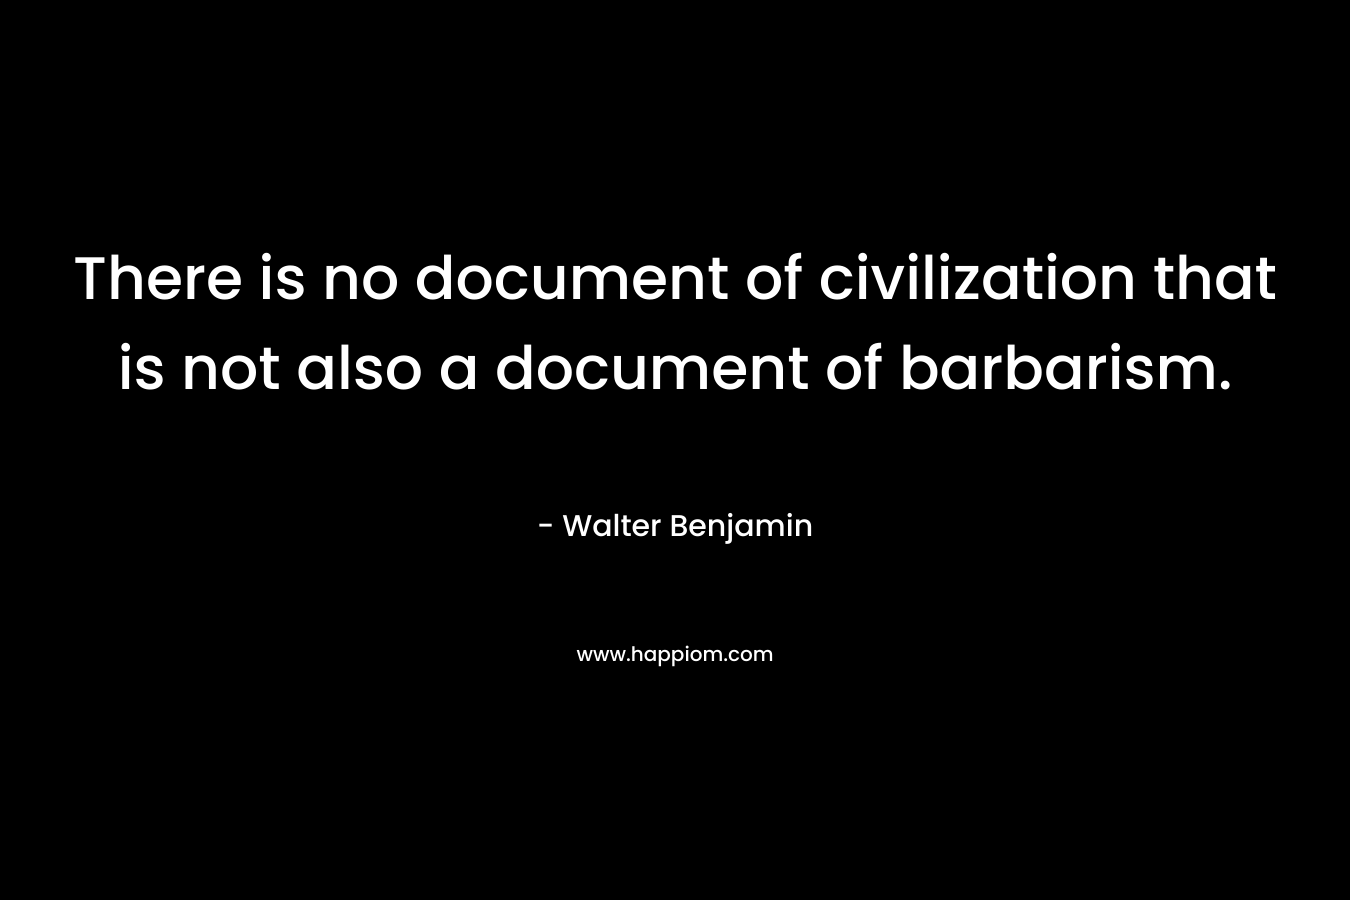 There is no document of civilization that is not also a document of barbarism. – Walter Benjamin